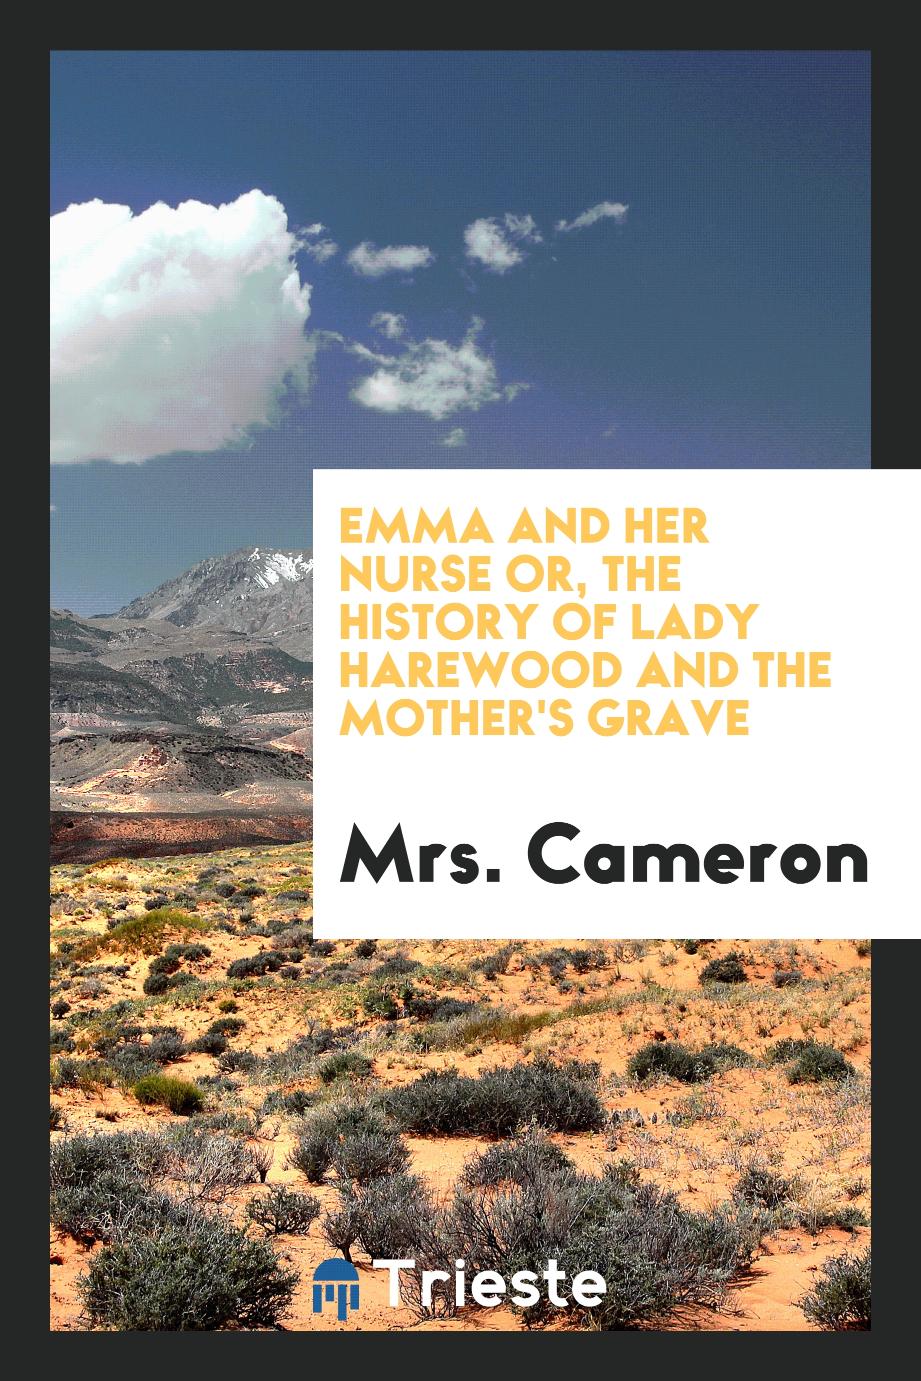 Emma and Her Nurse or, the History of Lady Harewood and the Mother's Grave